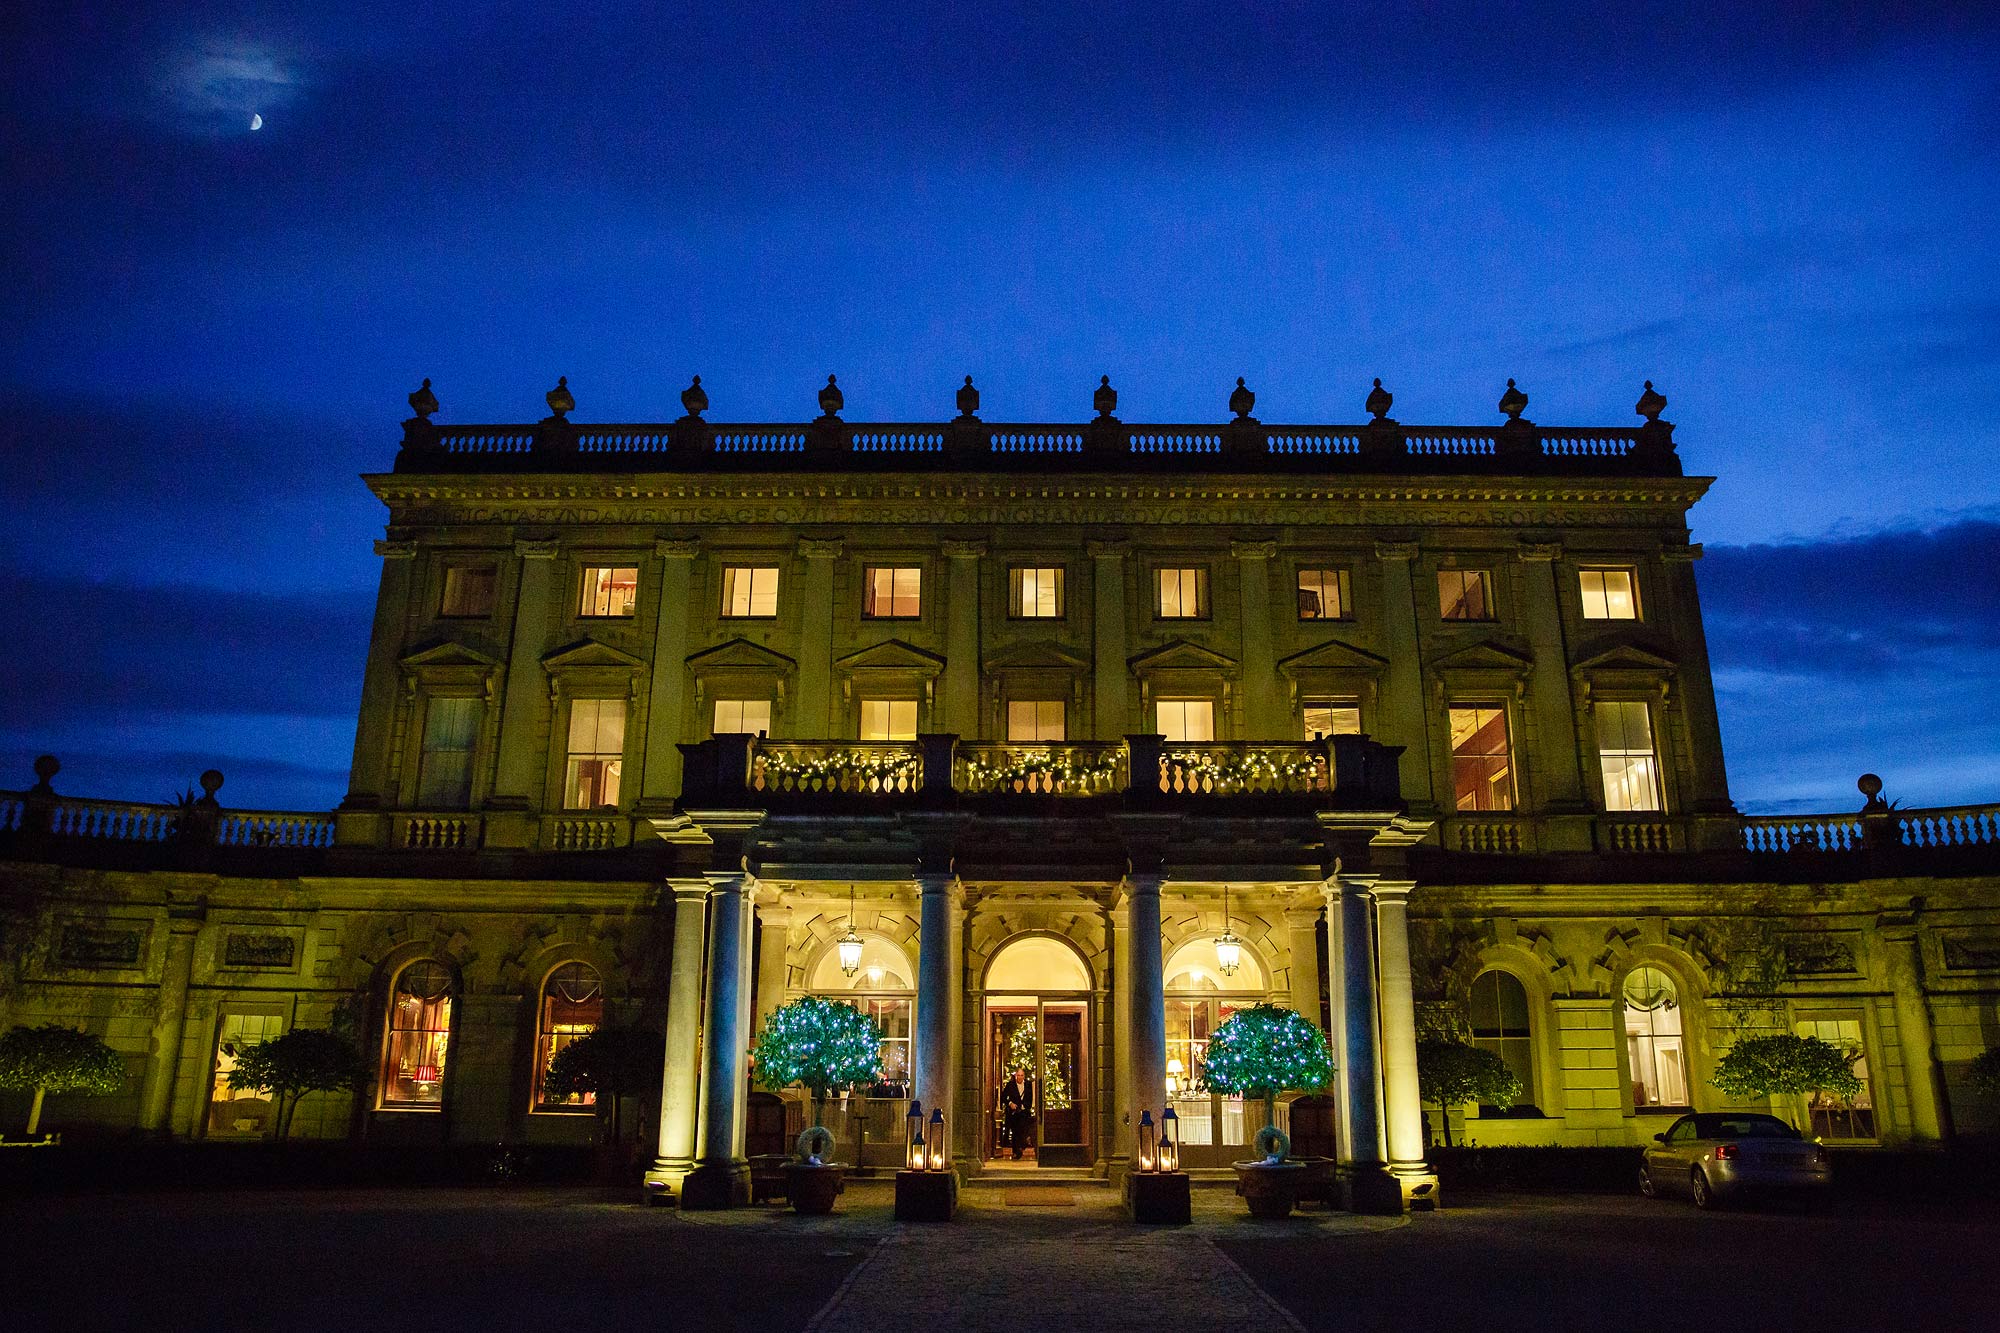 Cliveden House at night